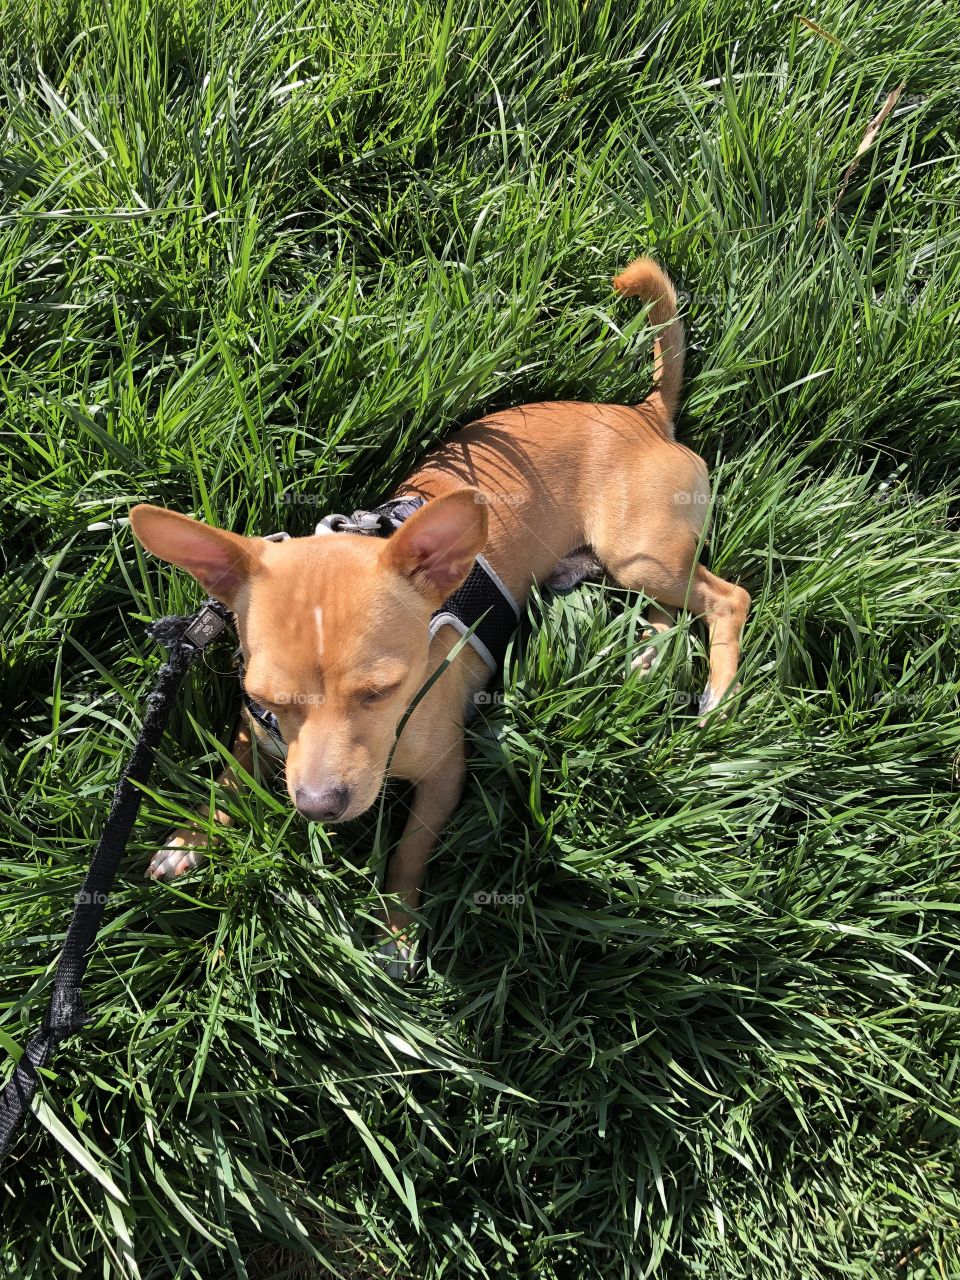 Pup in grass